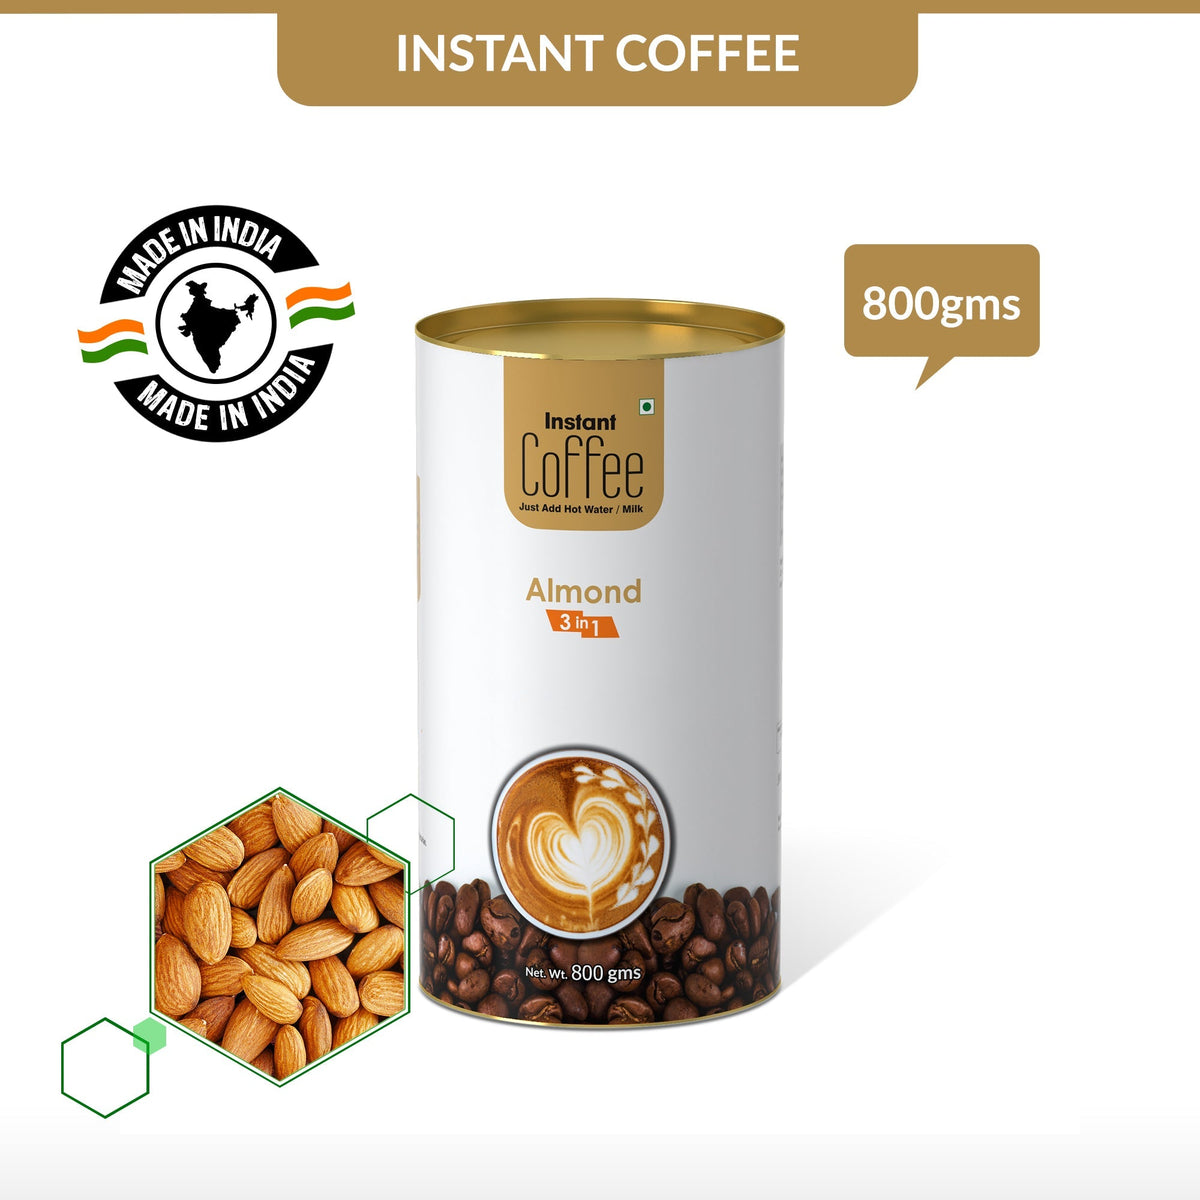 Almond Instant Coffee Premix (3 in 1) - 800 gms